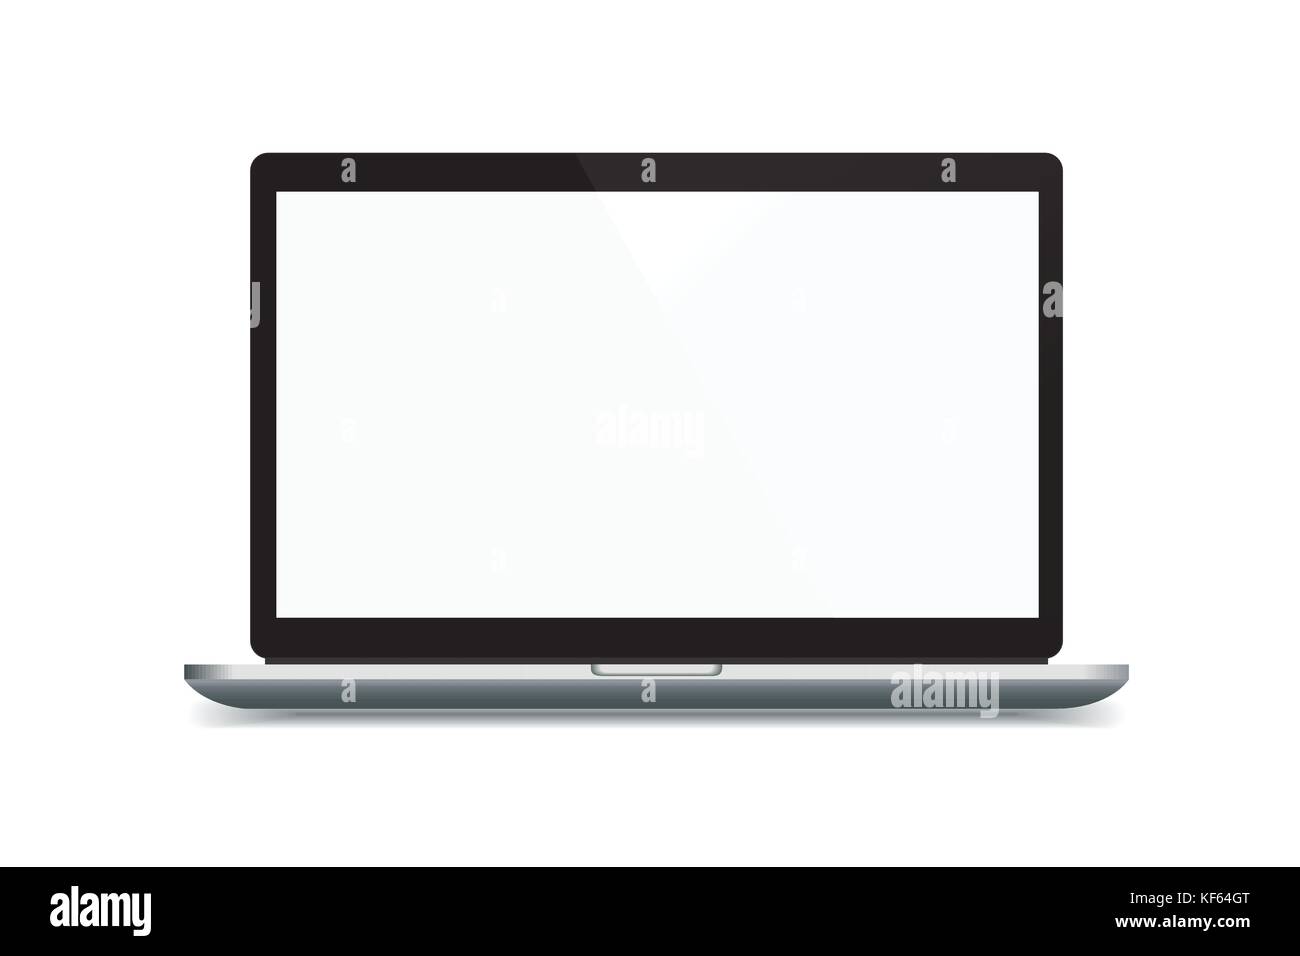 Realistic vector illustration of metal black and silver laptop with open blank display isolated on white background Stock Vector